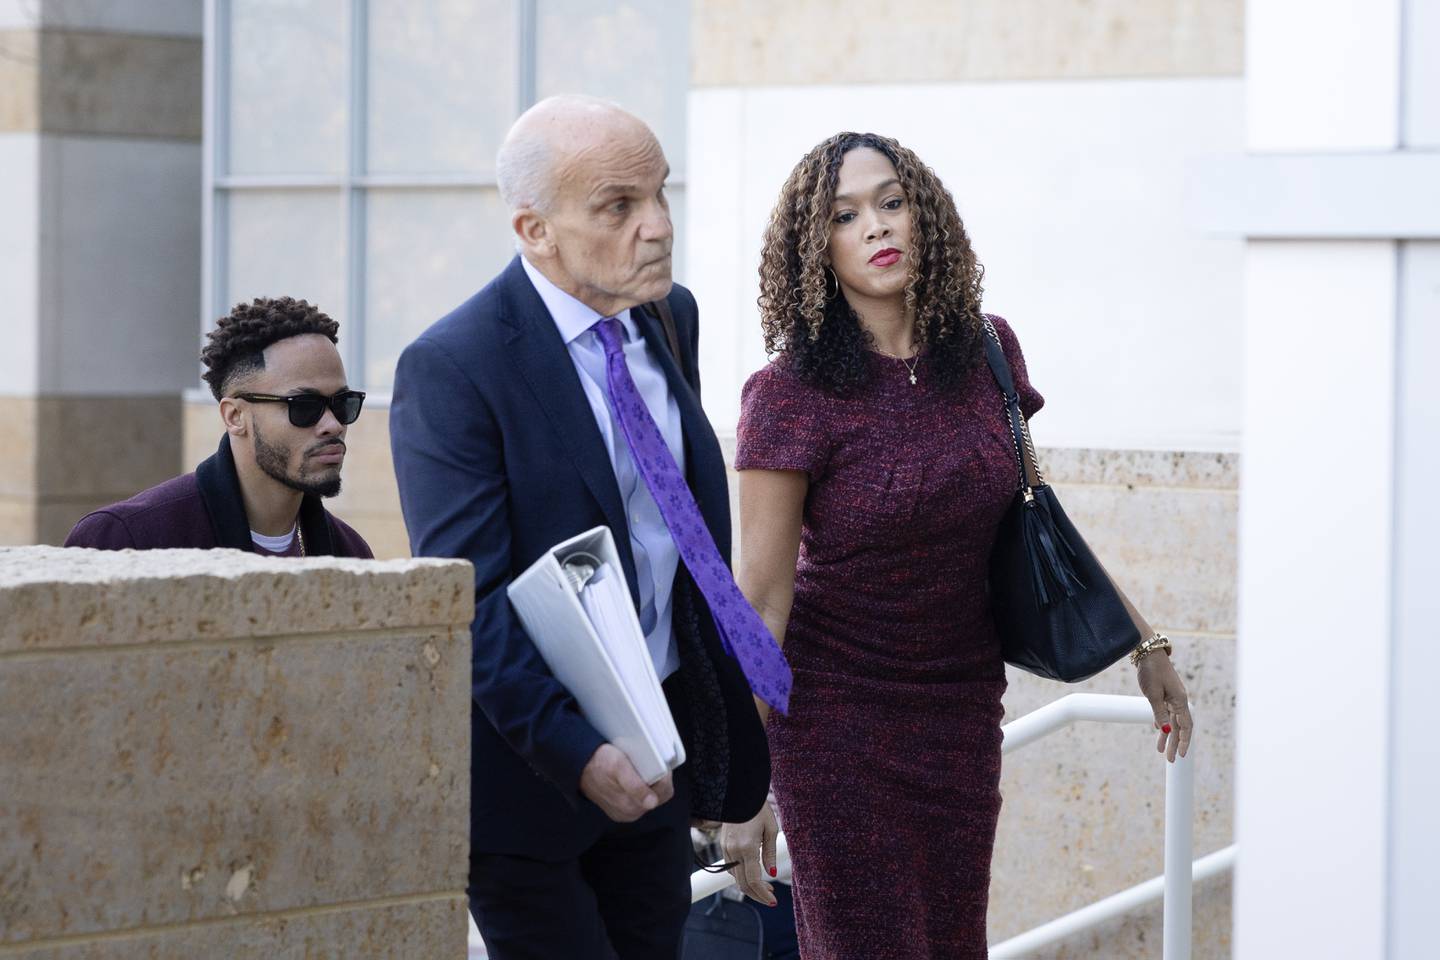 Former Baltimore State’s Attorney Marilyn Mosby arrives at U.S. District Court alongside Federal Public Defender James Wyda in Greenbelt, Maryland, on Wednesday, November 8, 2023. Mosby weighed in on testifying following Tuesday’s proceedings during her federal perjury trial.